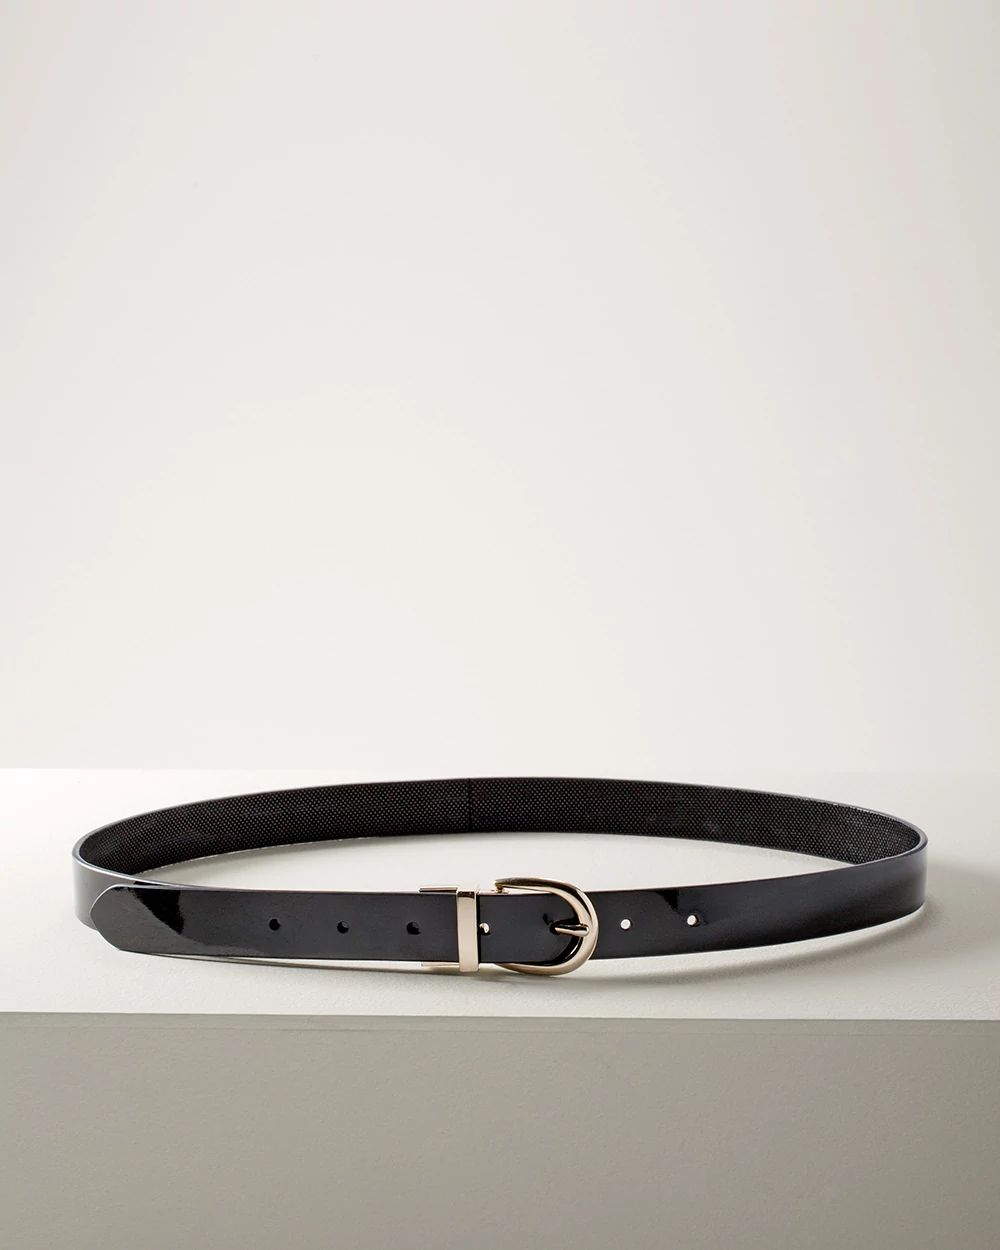 Reversible Black Patent Leather Belt click to view larger image.